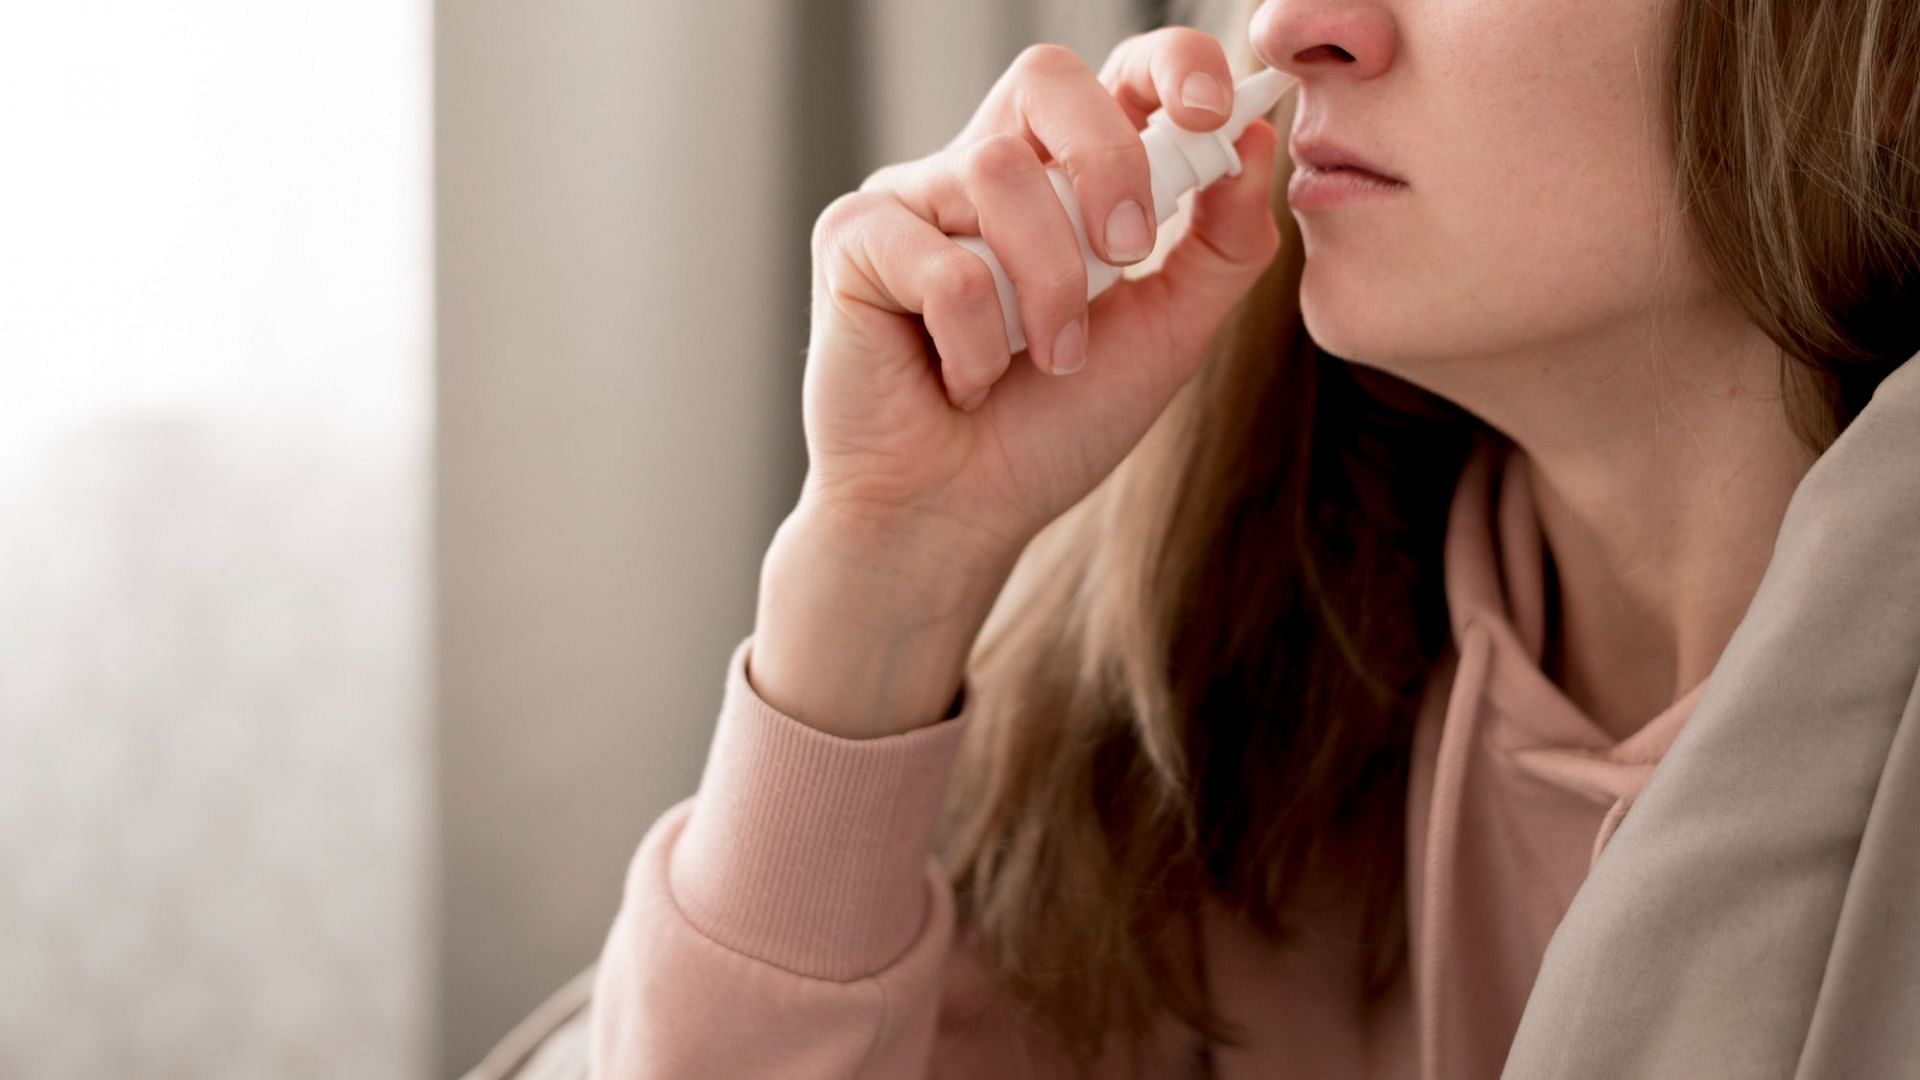 If you have sinusitis nasal corticosteroid sprays may be suggested for its treatment (Image via freepik)